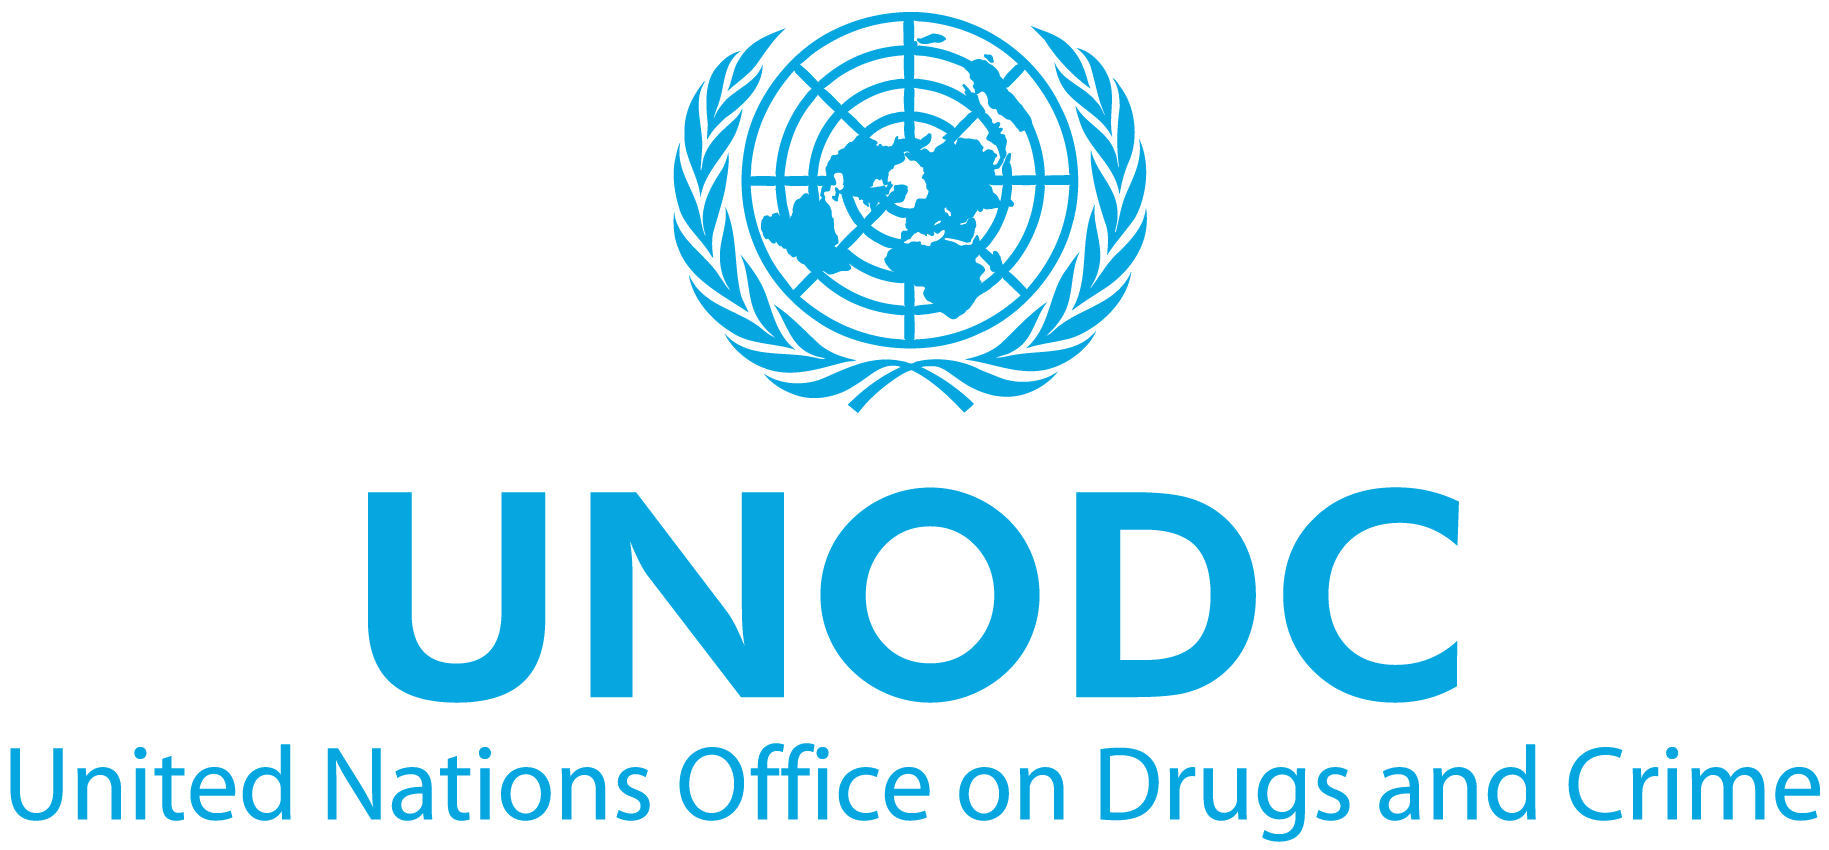 UNODC Logo - Wildlife crime assessed globally for the first time in new UNODC